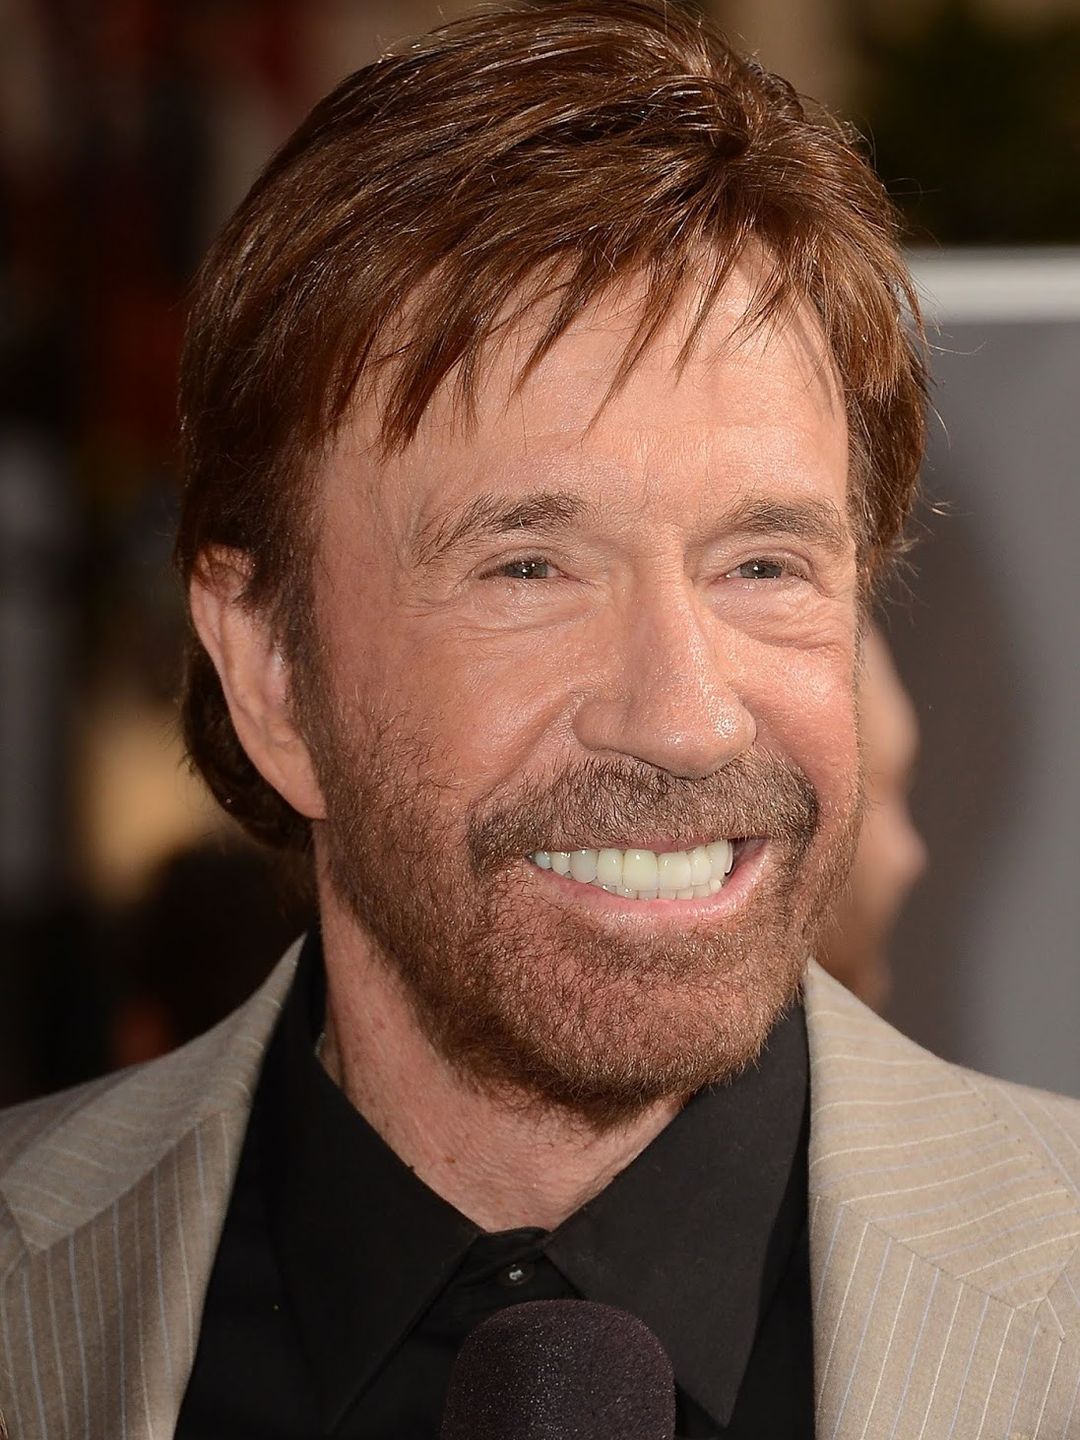 Chuck Norris who is his mother